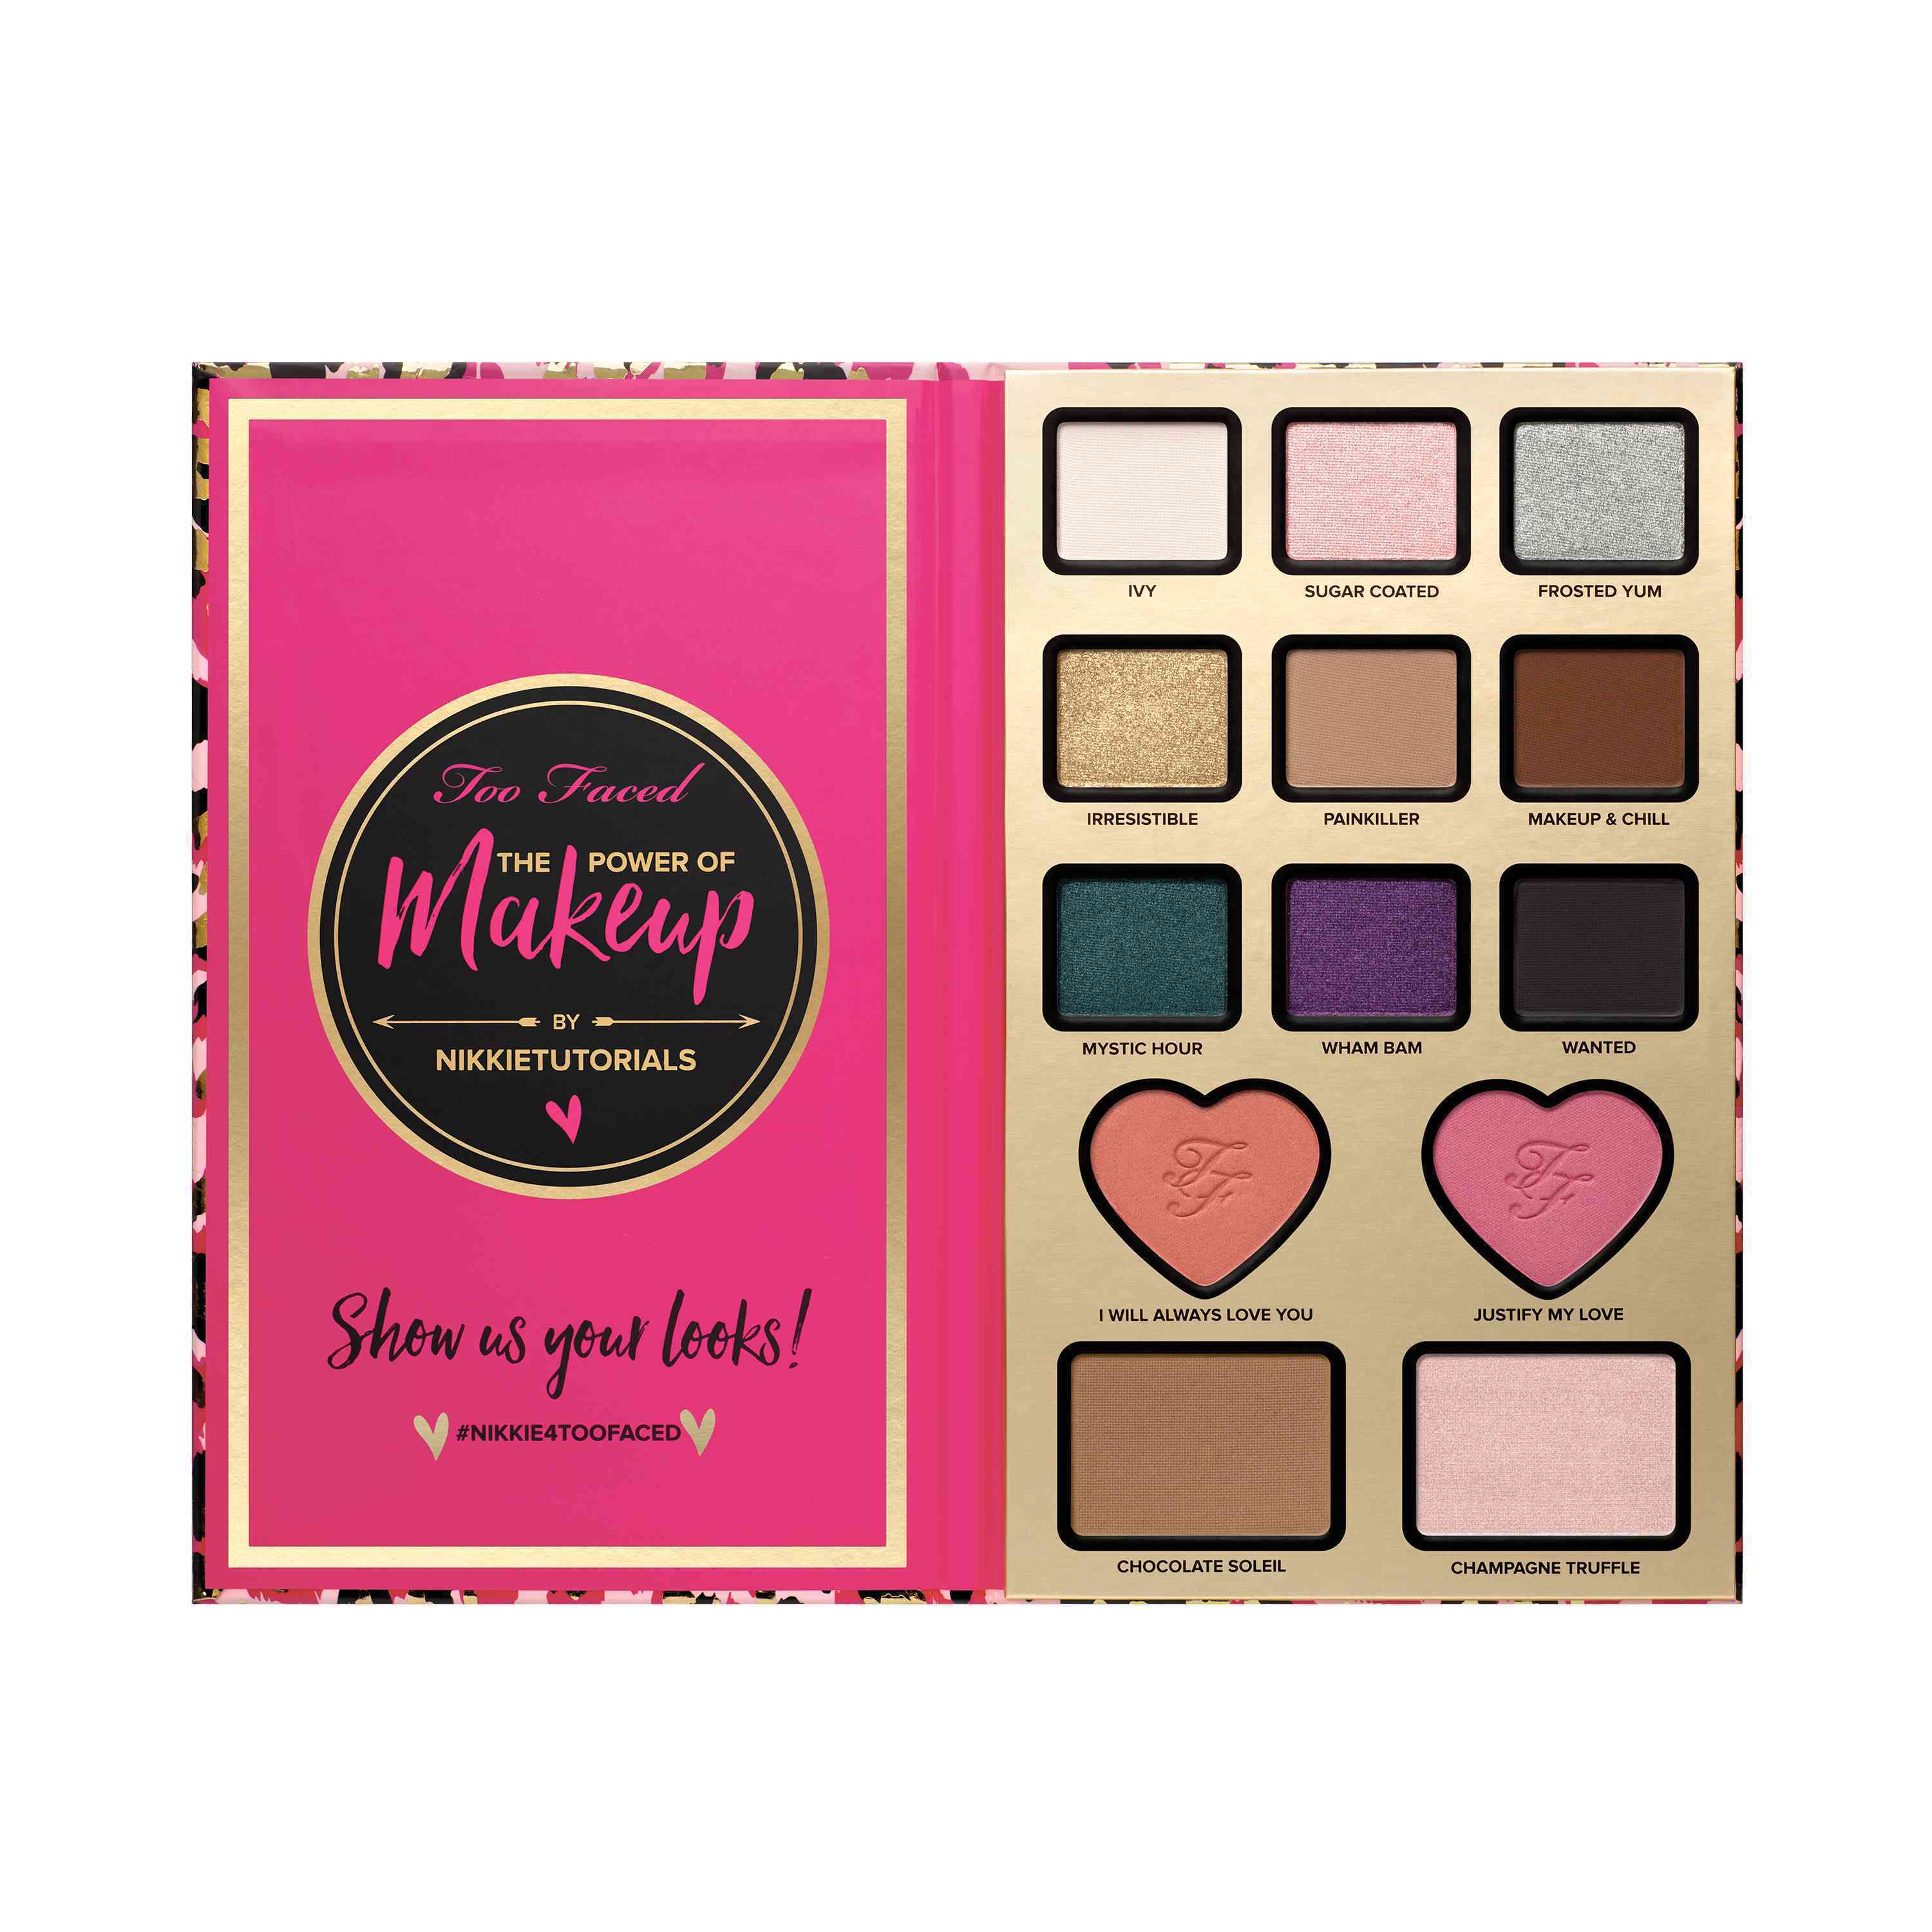 Too Faced THE POWER OF MAKEUP BY NIKKIE TUTORIALS